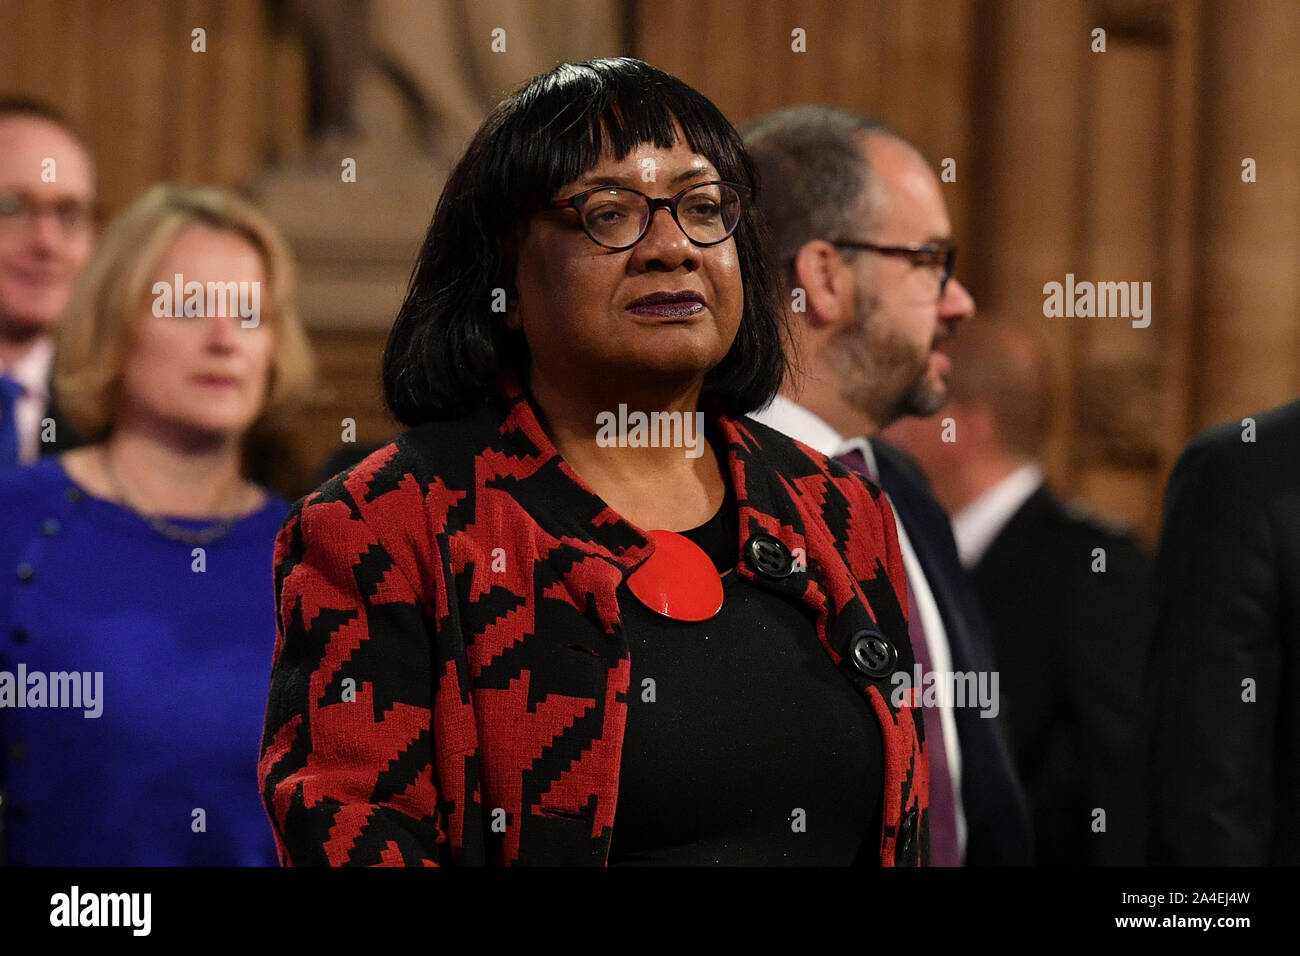 Shadow Home Secretary Diane Abbott in the Central Lobby as she walks back to the House of Commons after the Queen's Speech during the State Opening of Parliament ceremony in London. Stock Photo